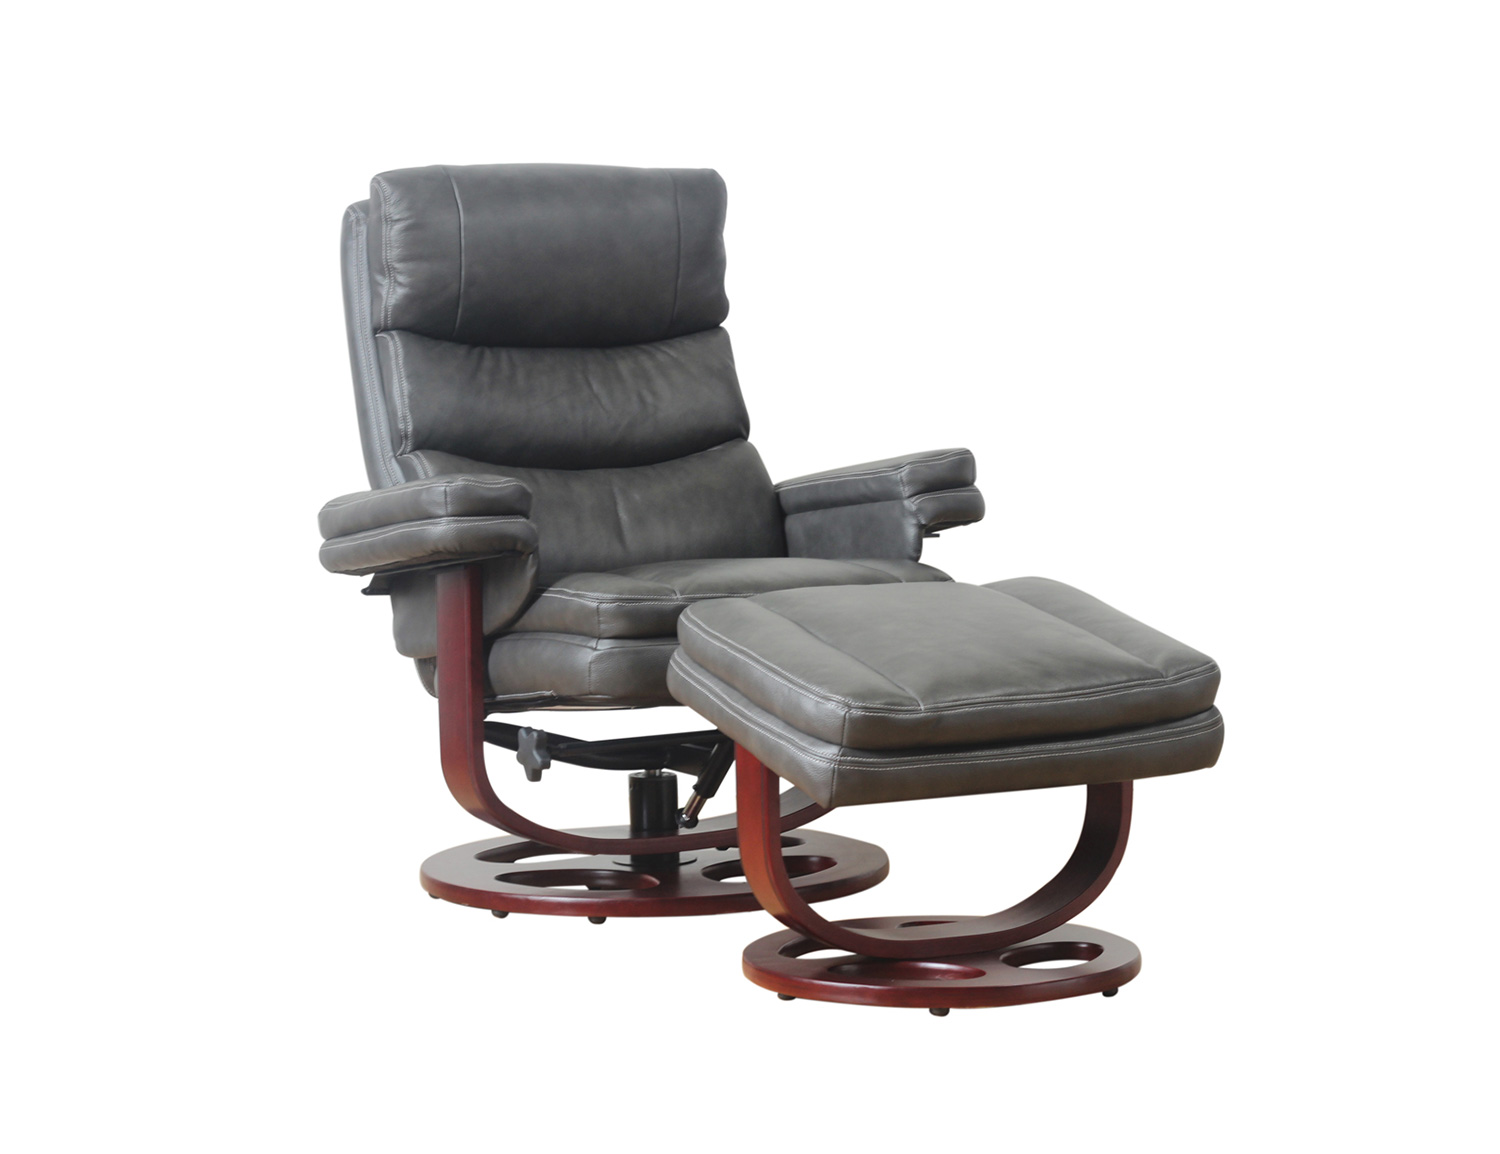 Barcalounger Bella Pedestal Recliner Chair and Ottoman - Chelsea Graphite/Leather Match